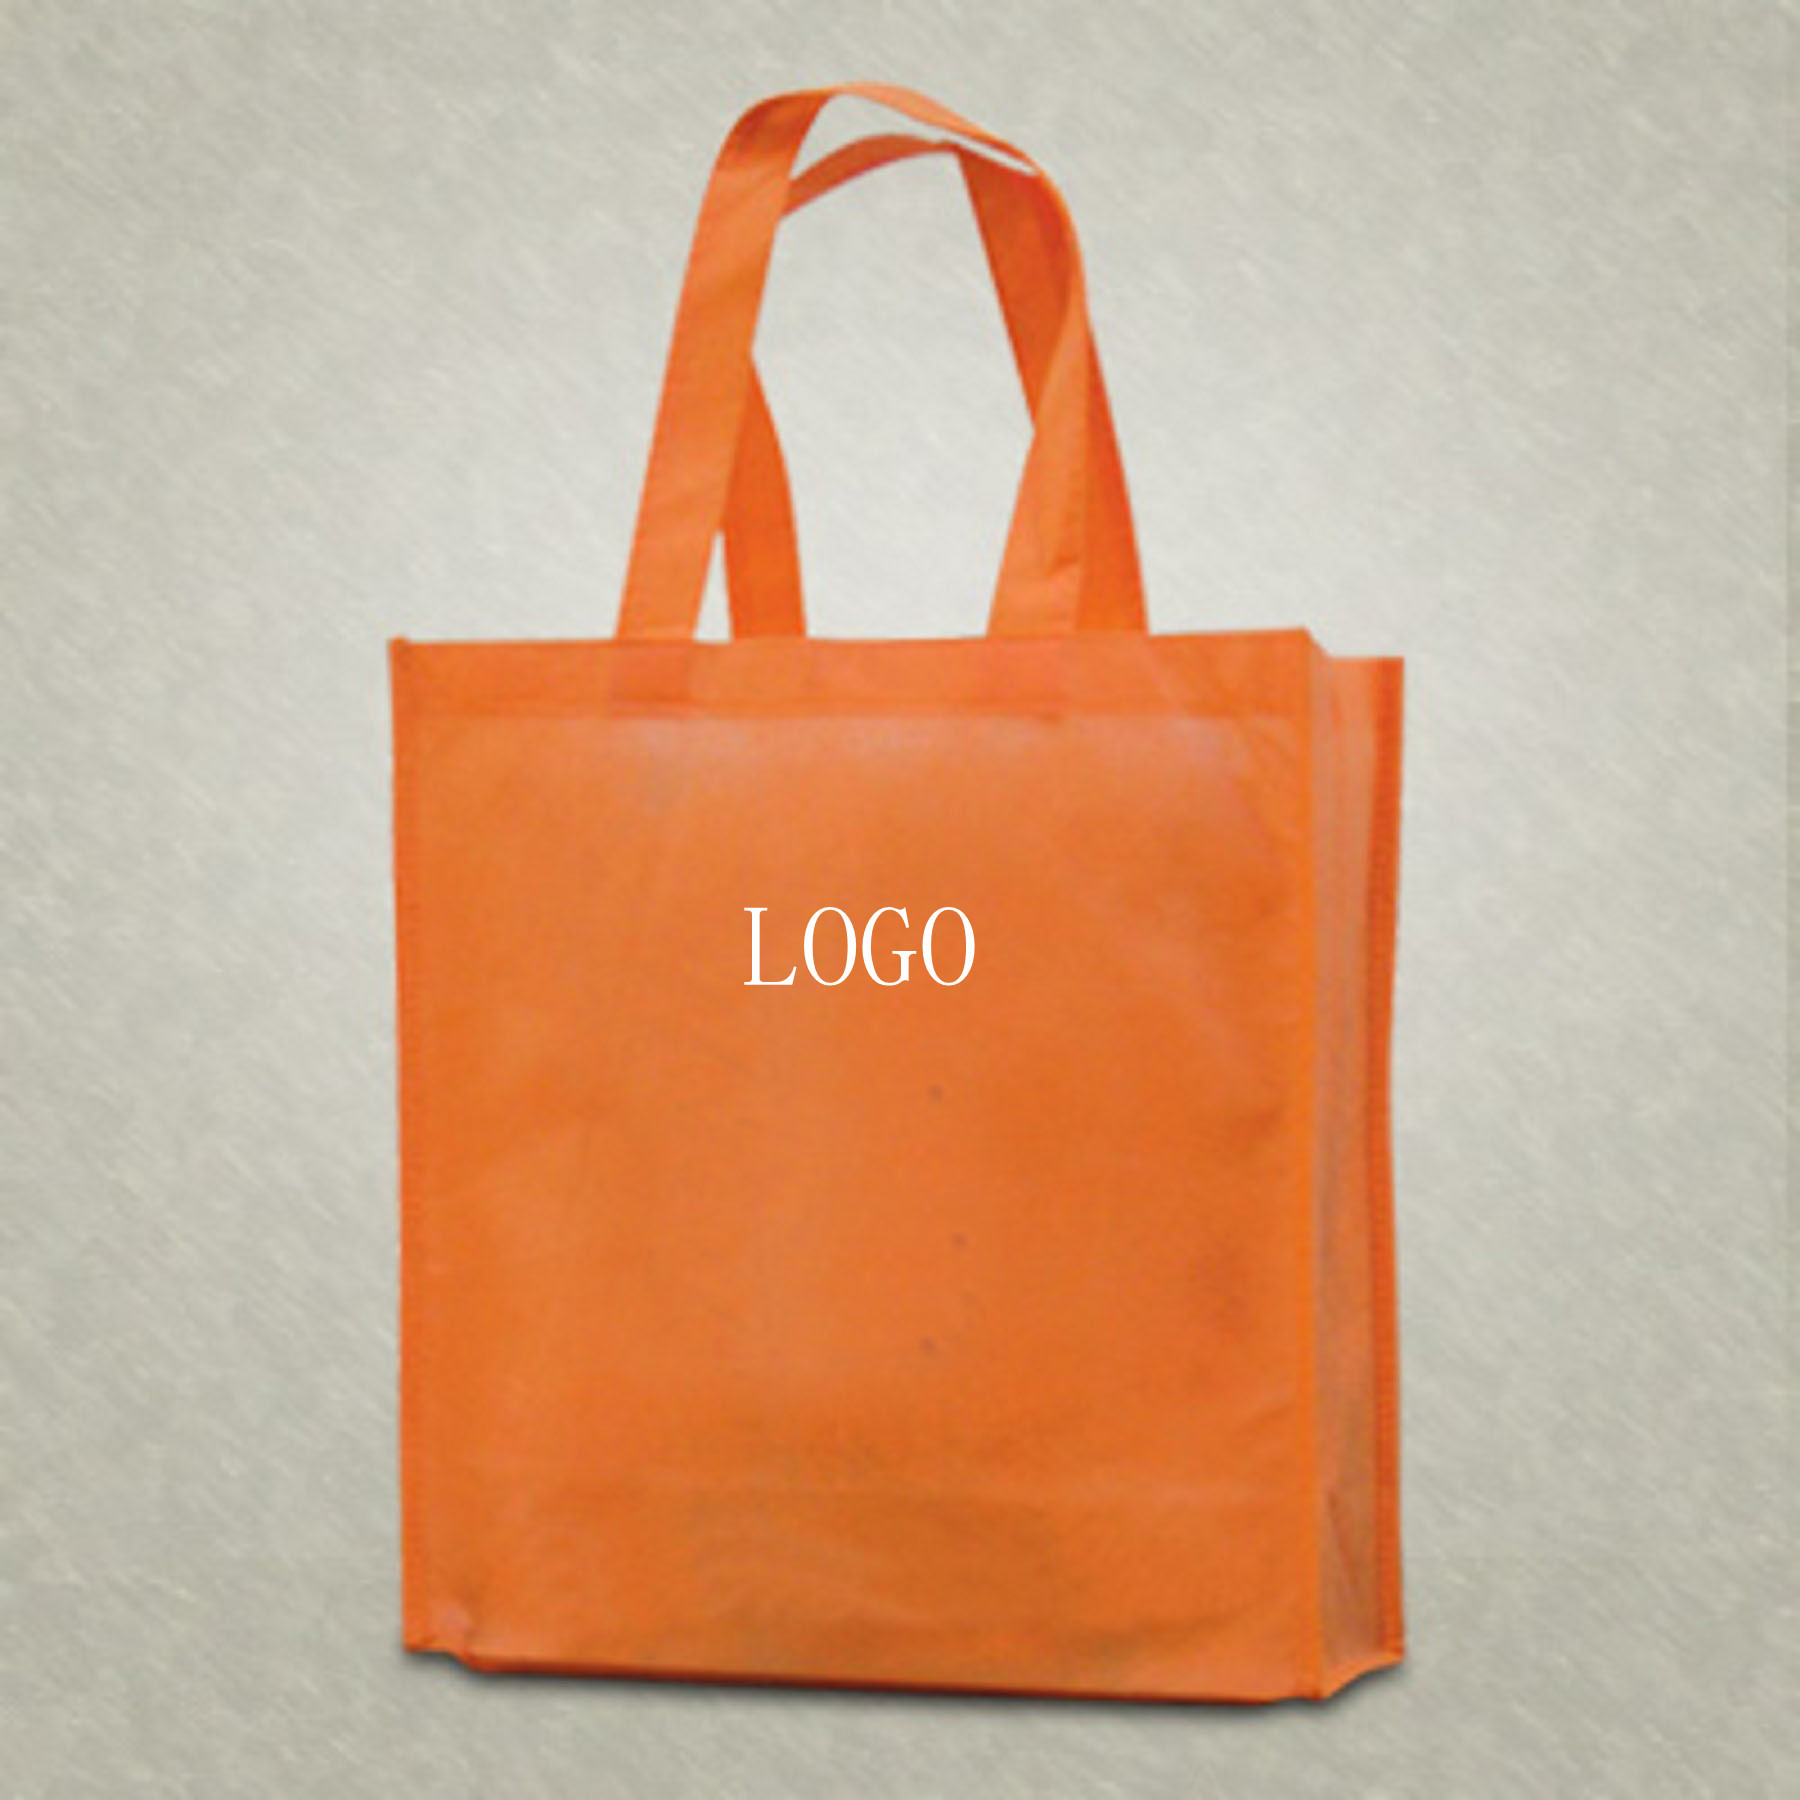 Quality non woven bag for sale